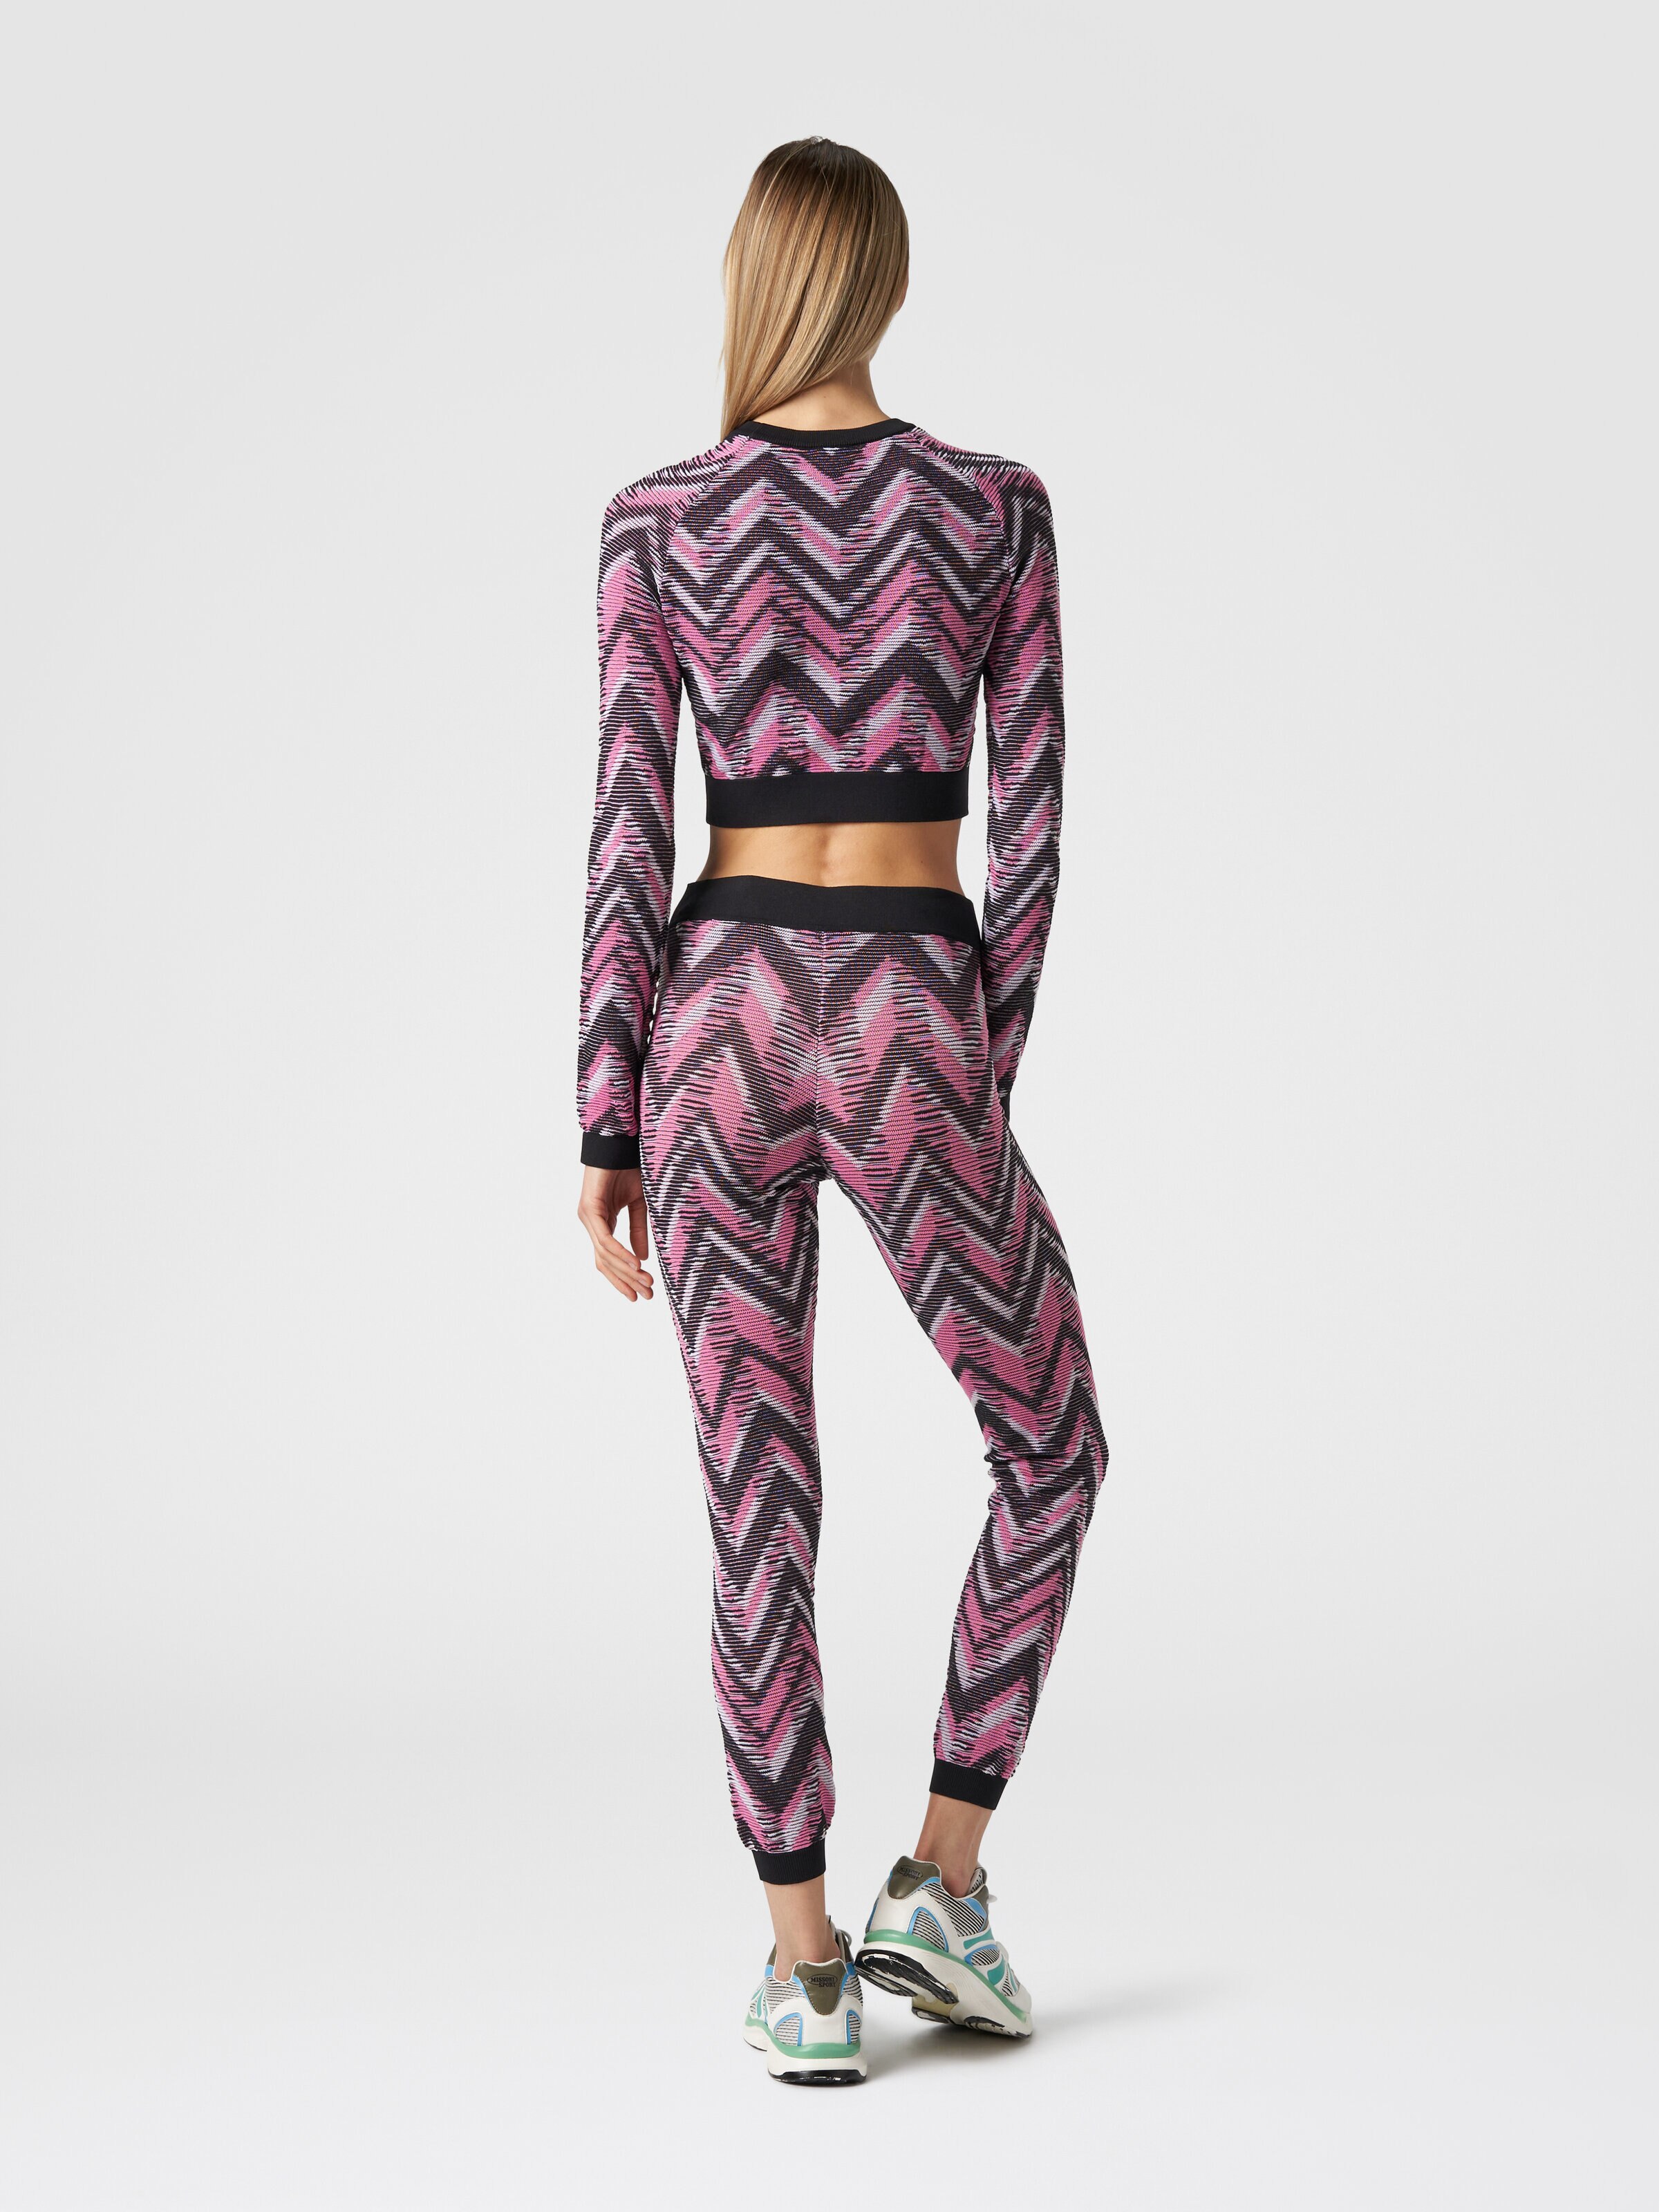 Long-sleeved crop top in chevron knit with logo, Multicoloured  - 2